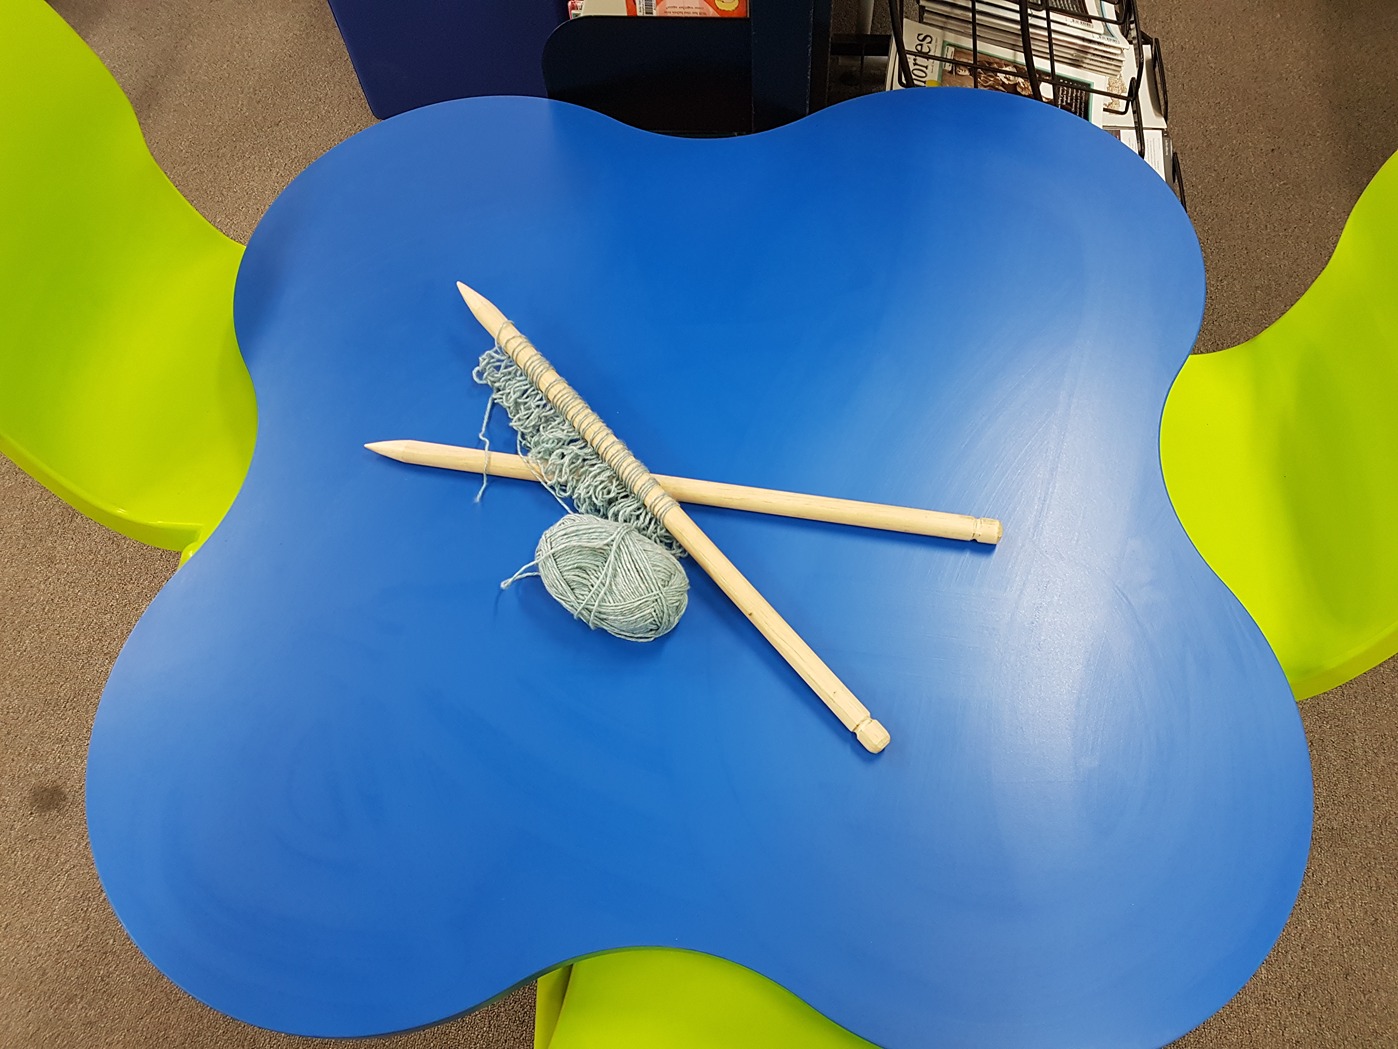 Knitting needles and yarn on a bright blue table